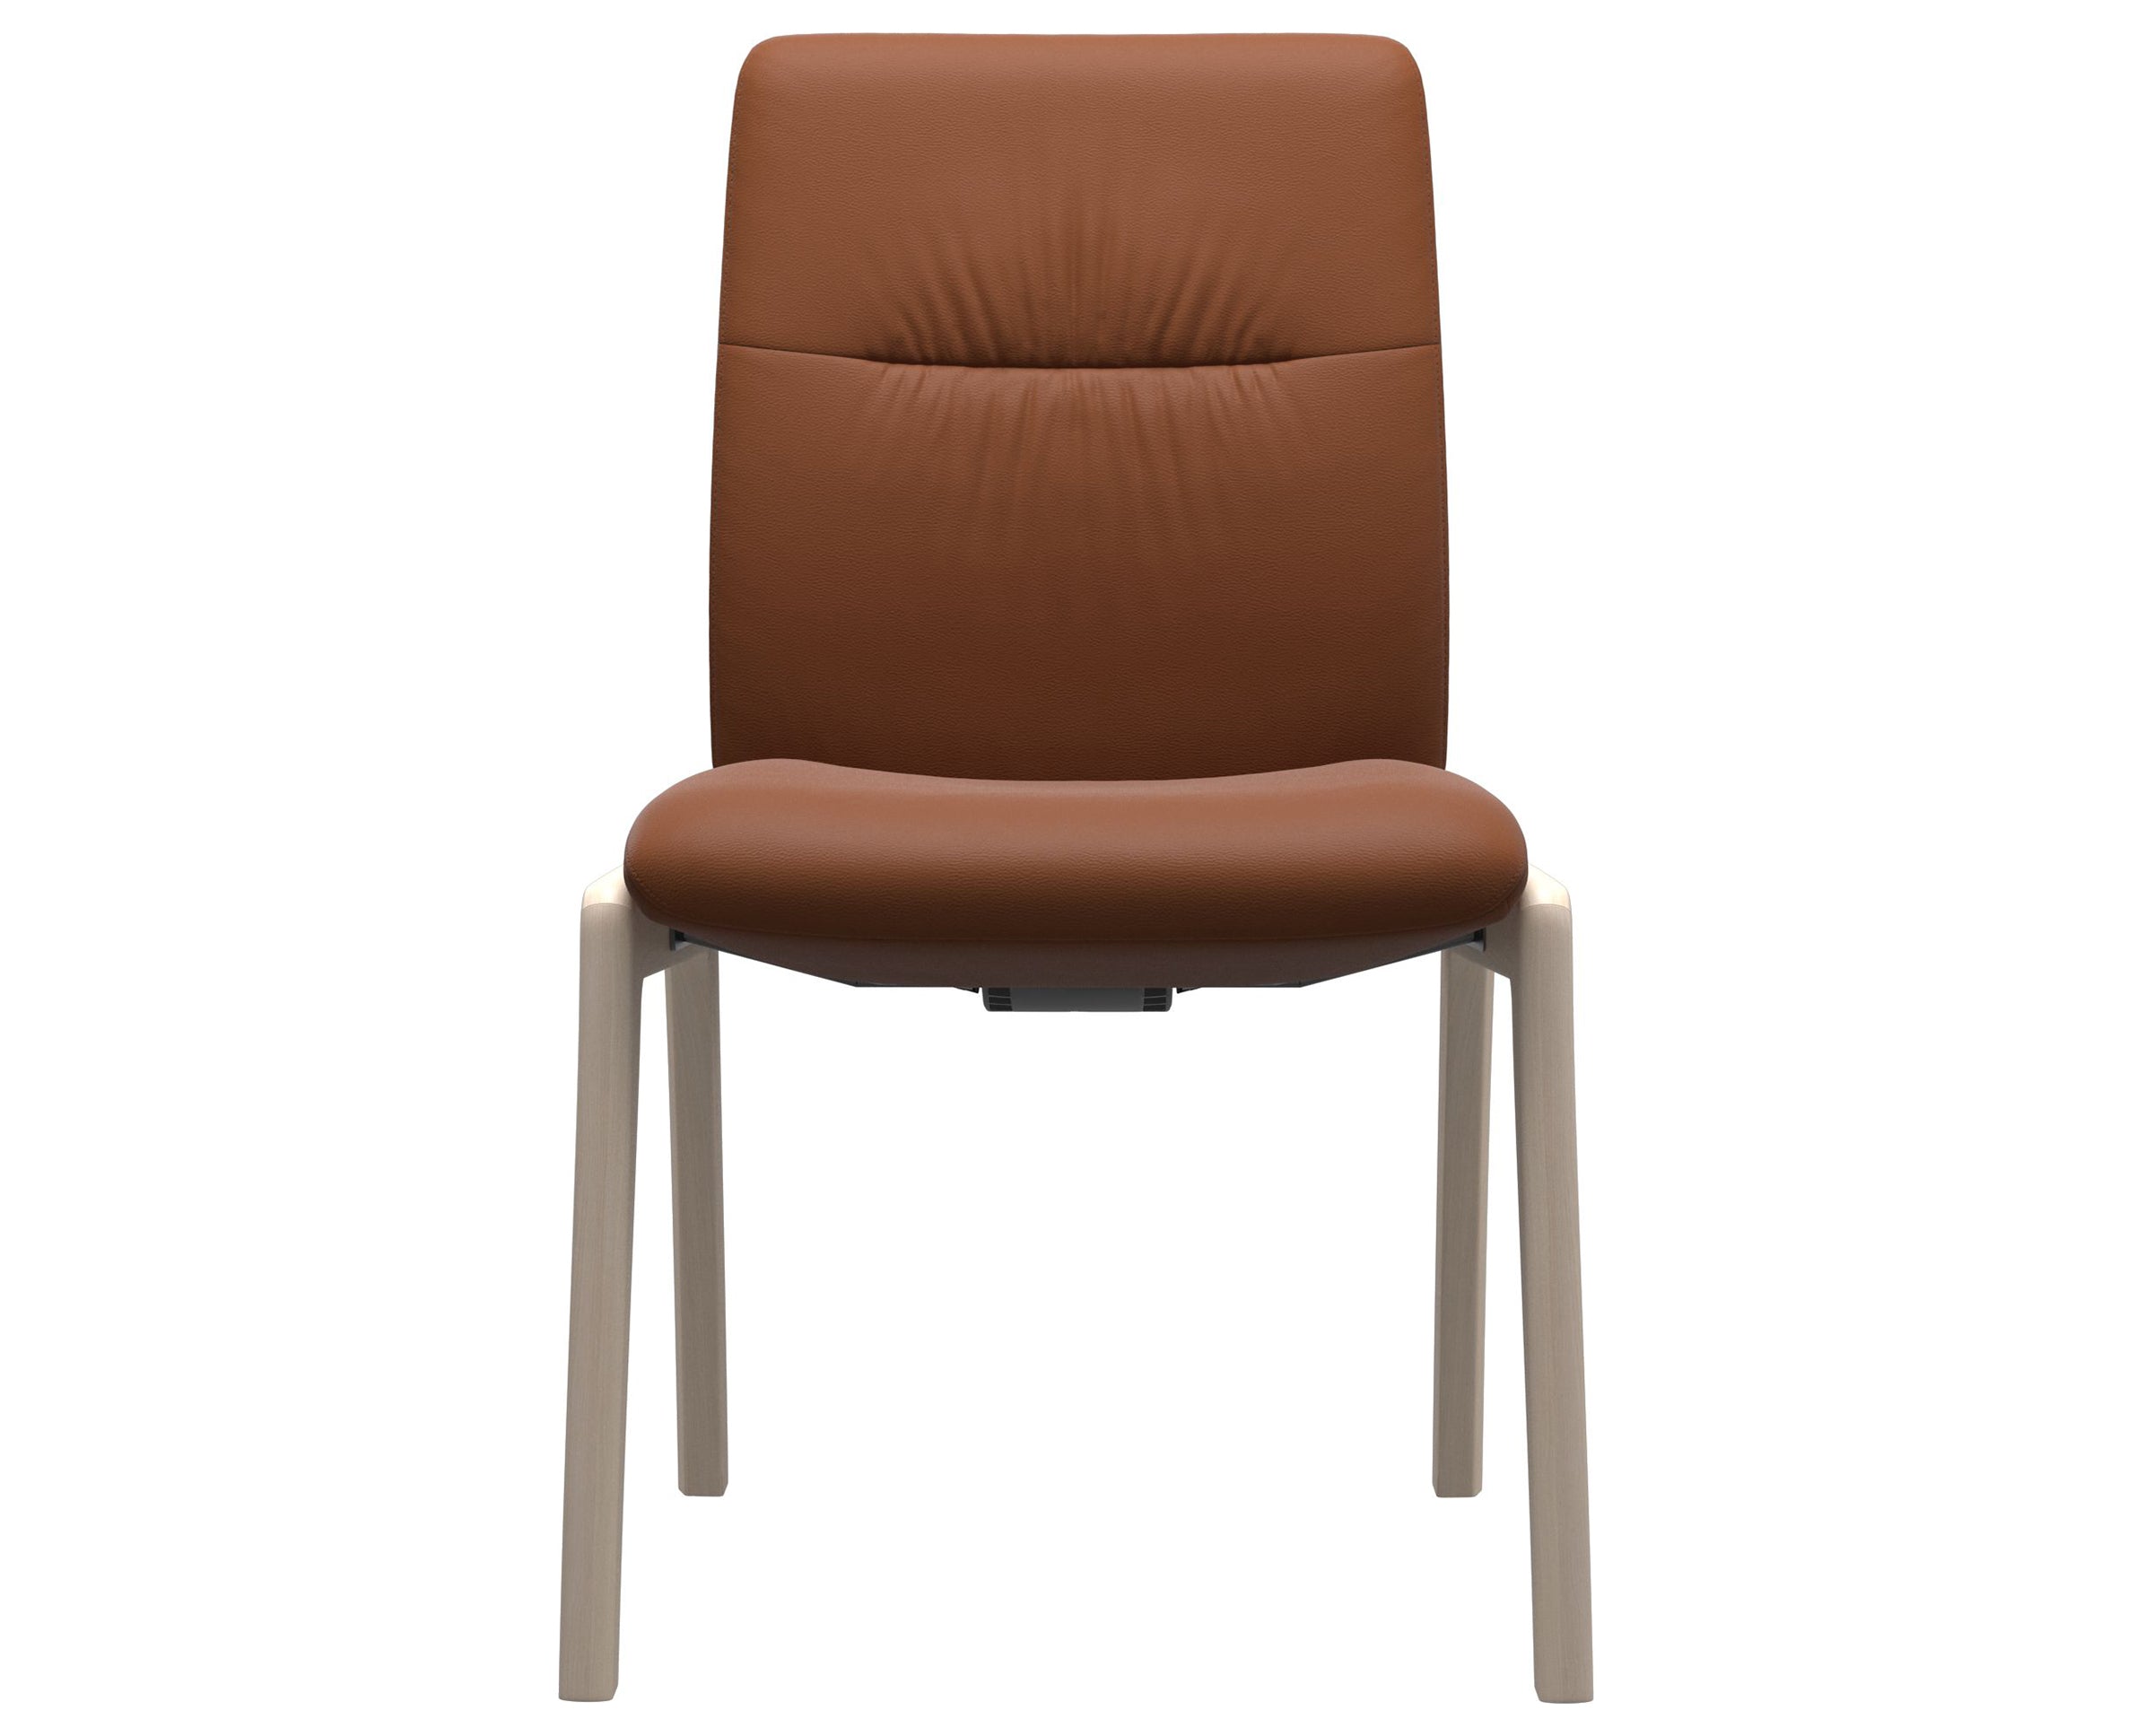 Paloma Leather New Cognac and Whitewash Base | Stressless Mint Low Back D100 Dining Chair | Valley Ridge Furniture